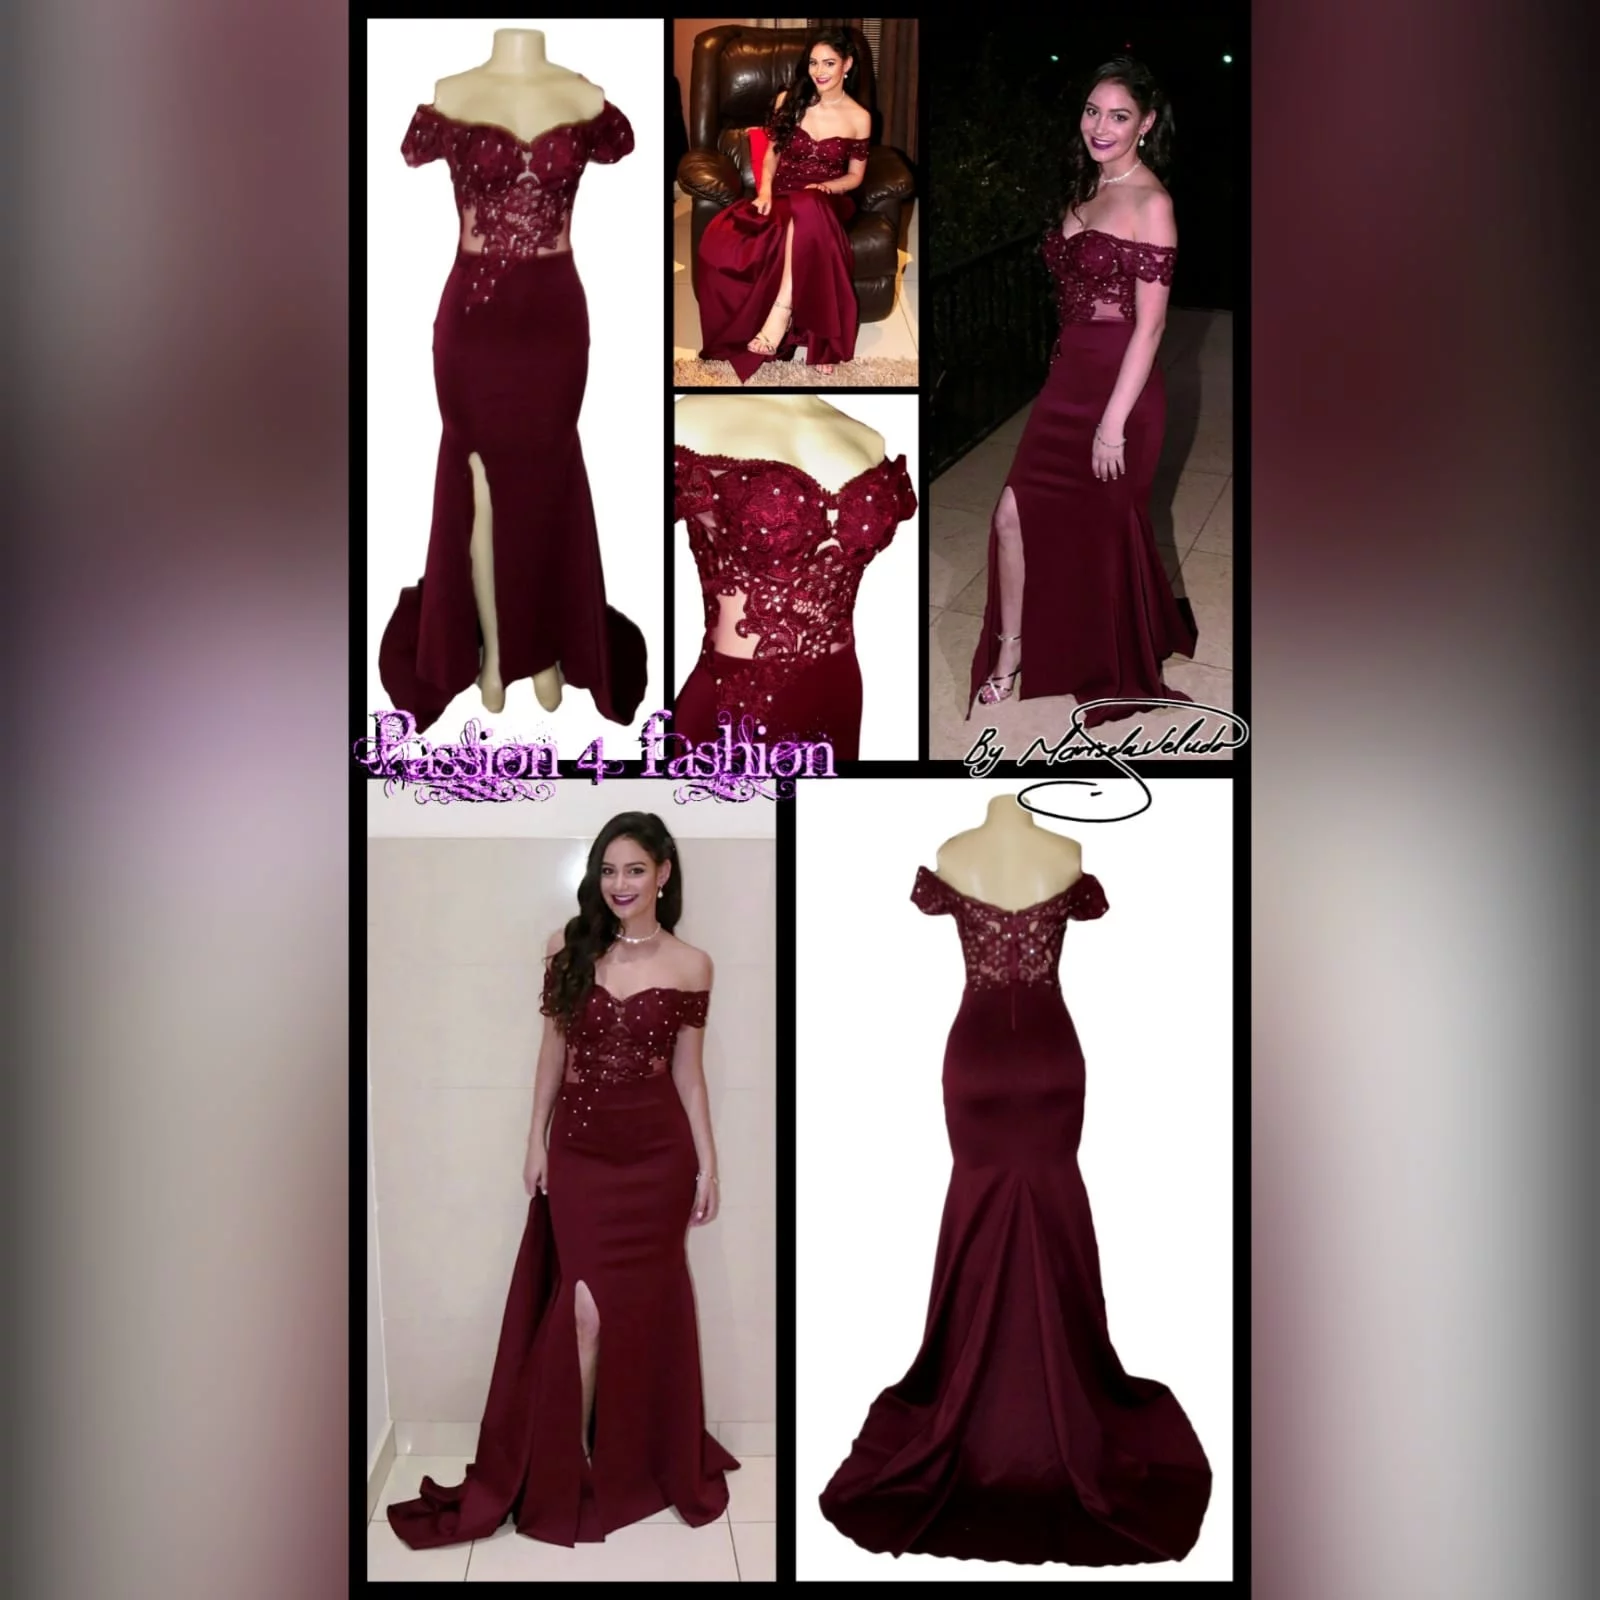 Burgundy off shoulder long matric dance dress 5 burgundy off shoulder long matric dance dress. With an illusion bodice detailed with lace and beads and off-shoulder short sleeves. Bottom fitted till hip, with a high slit and a train for a touch of sexy and drama.